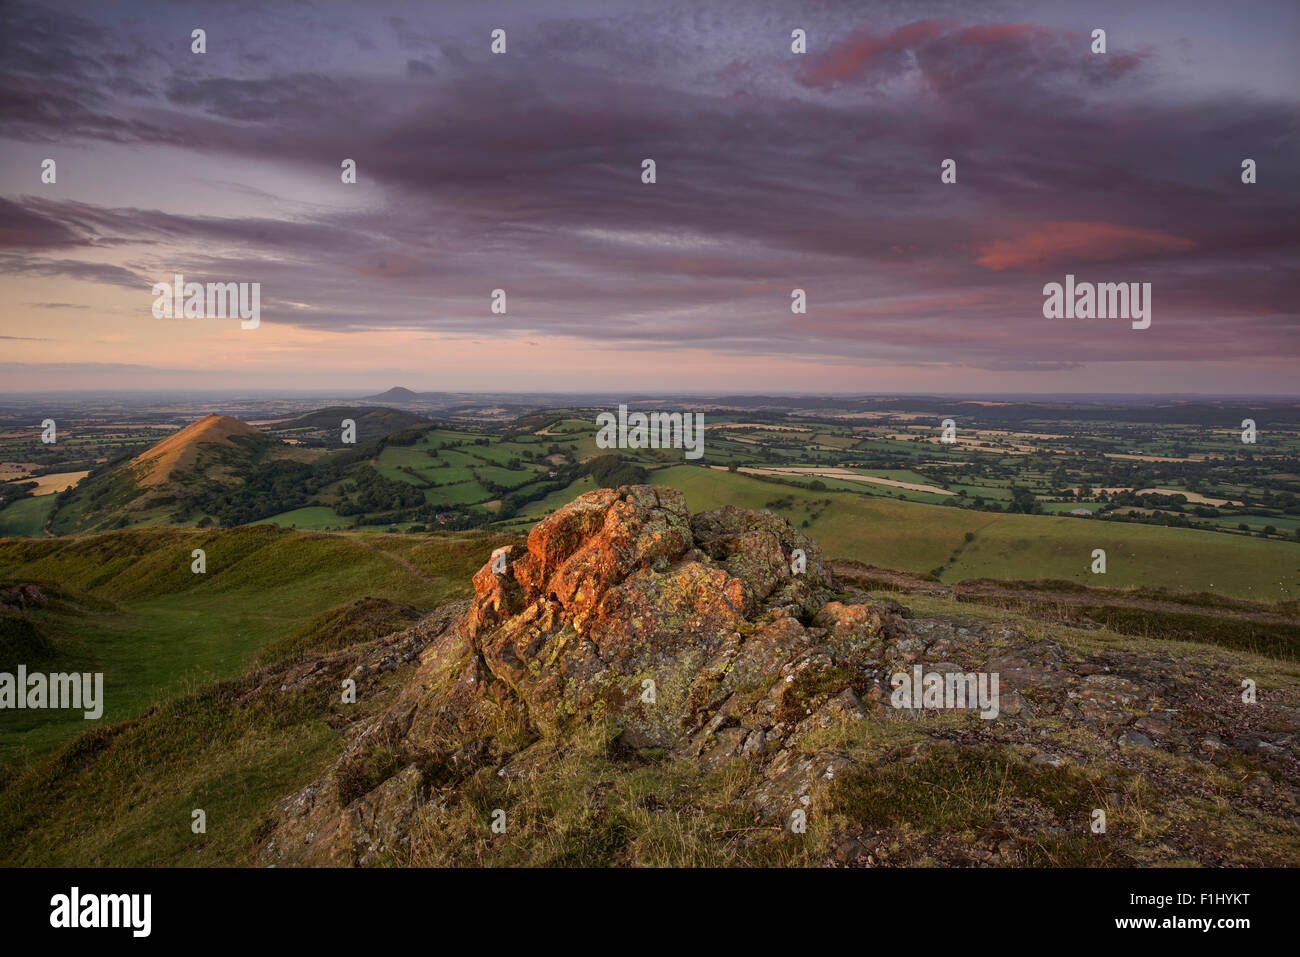 The view from the summit of Caer Caradoc towards The Lawley and The Wrekin at Sunset, Church Stretton, Shropshire, UK Stock Photo